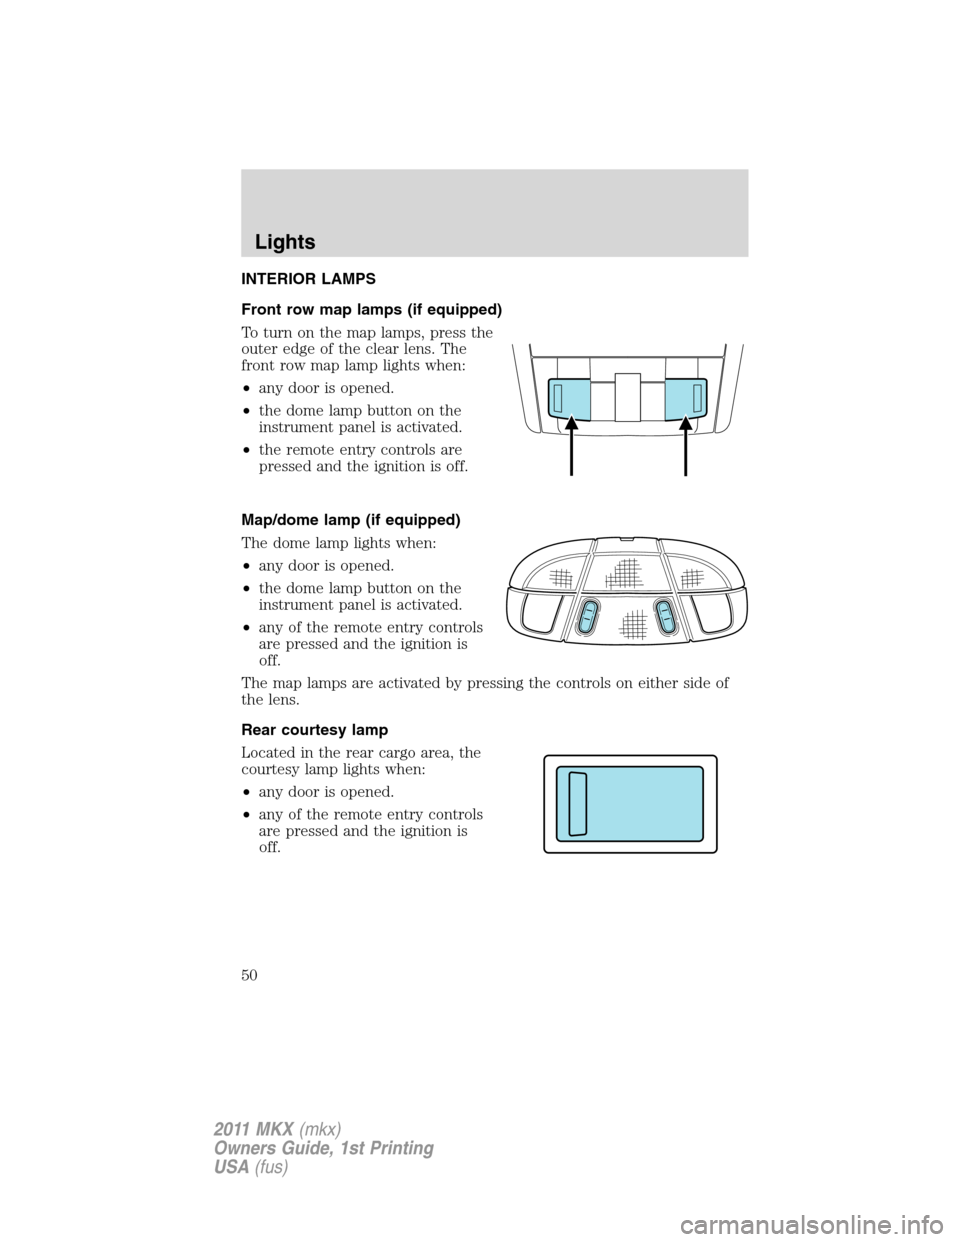 LINCOLN MKX 2011  Owners Manual INTERIOR LAMPS
Front row map lamps (if equipped)
To turn on the map lamps, press the
outer edge of the clear lens. The
front row map lamp lights when:
•any door is opened.
•the dome lamp button on